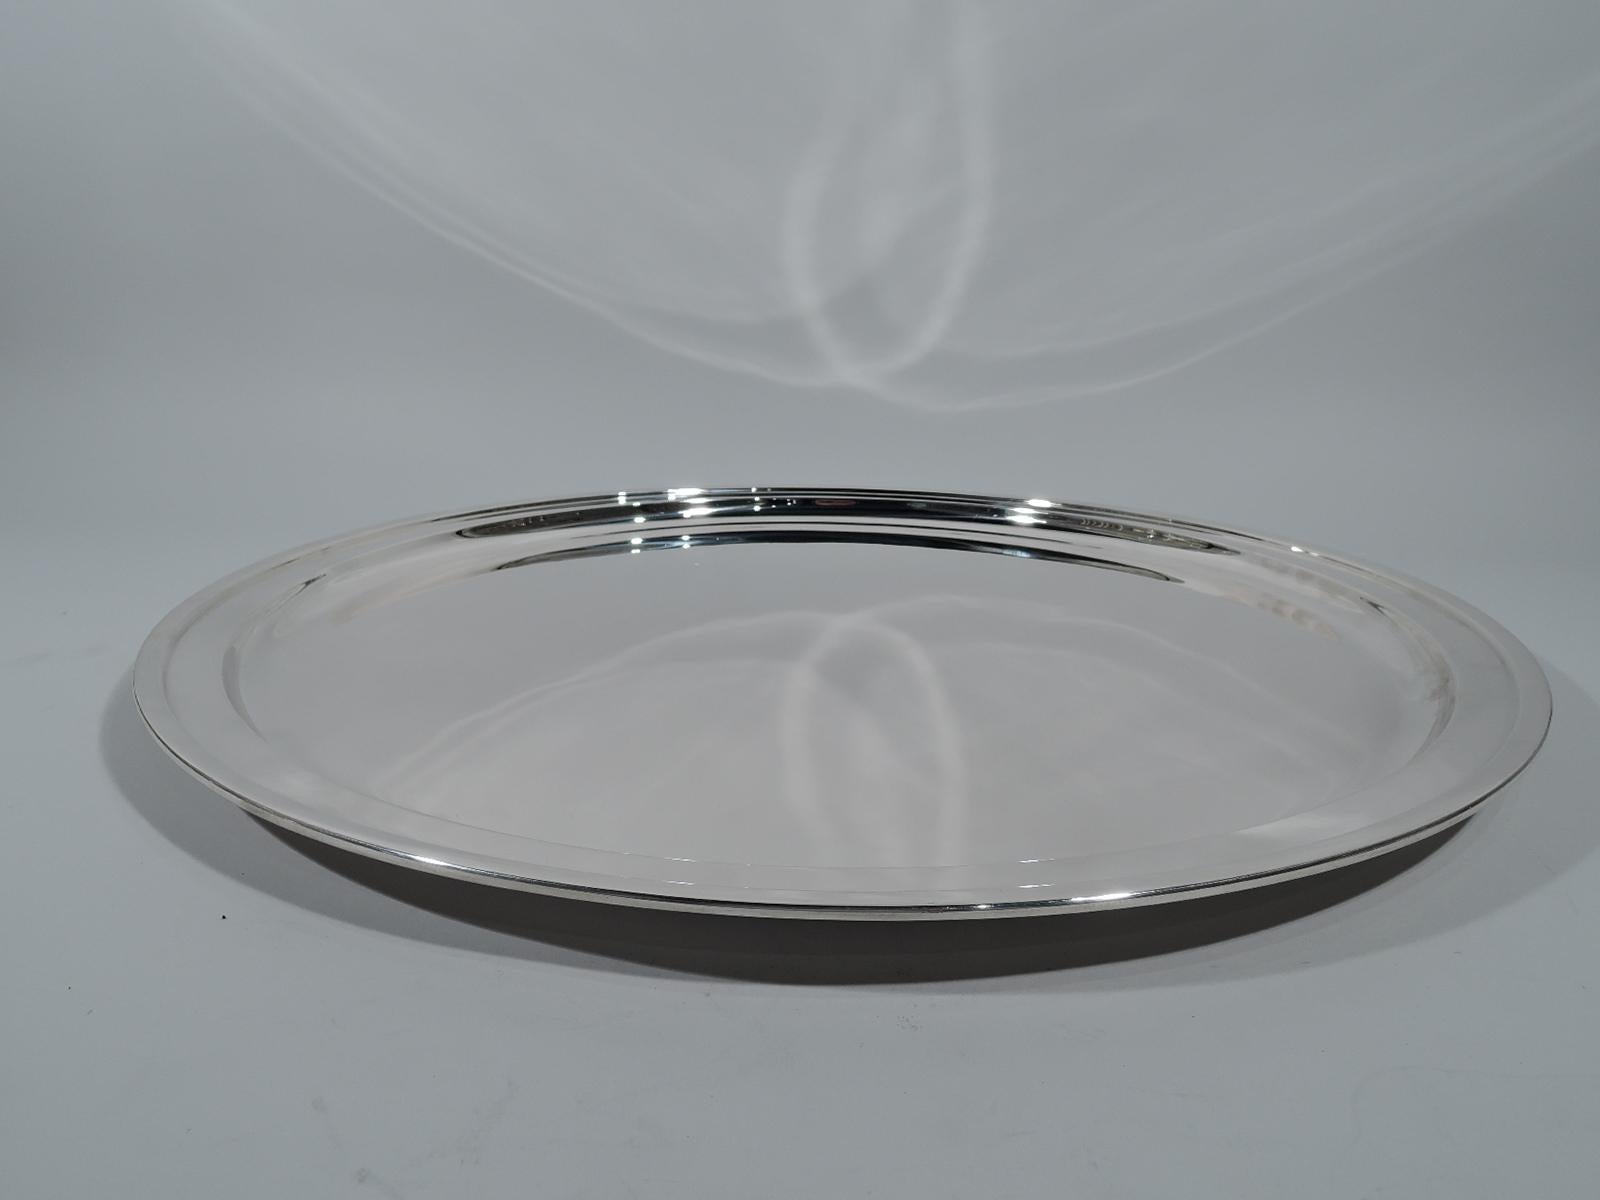 Very large sterling silver serving tray. Made by Tiffany & Co. in New York. Circular with molded rim. The traditional form super-sized. Hallmark includes postwar pattern no. 23542. Weight: 106 troy ounces.